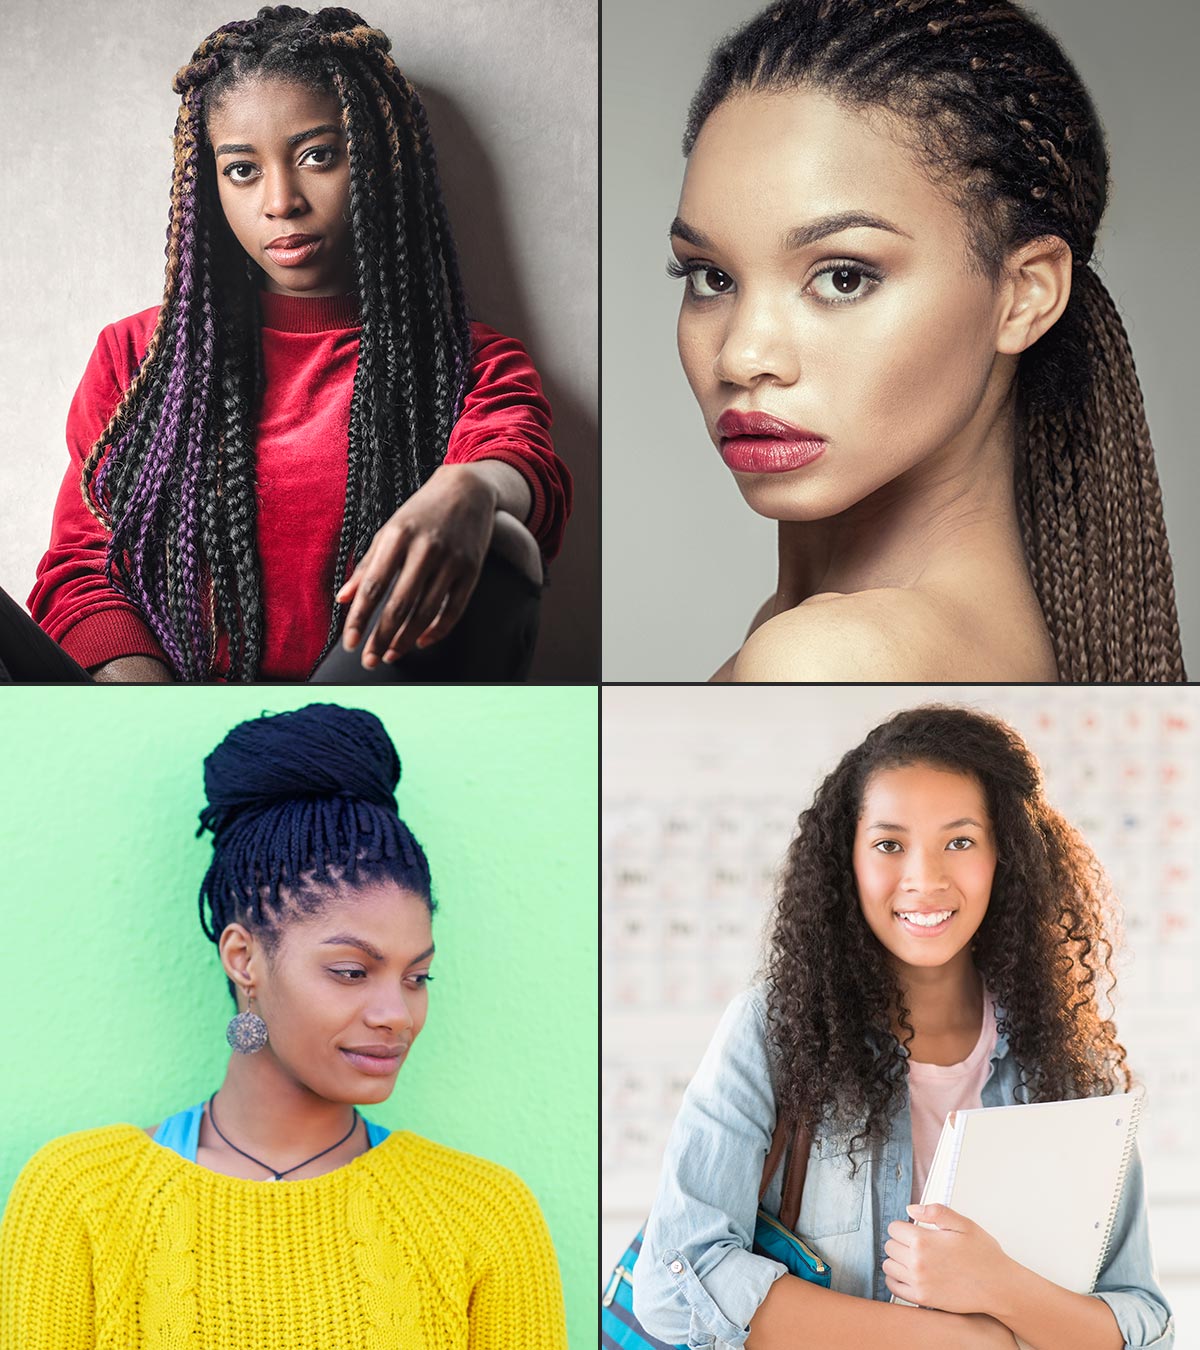 120 African Braids Hairstyle Pictures to Inspire You  ThriveNaija  African  braids hairstyles pictures Bob braids hairstyles Braids hairstyles  pictures